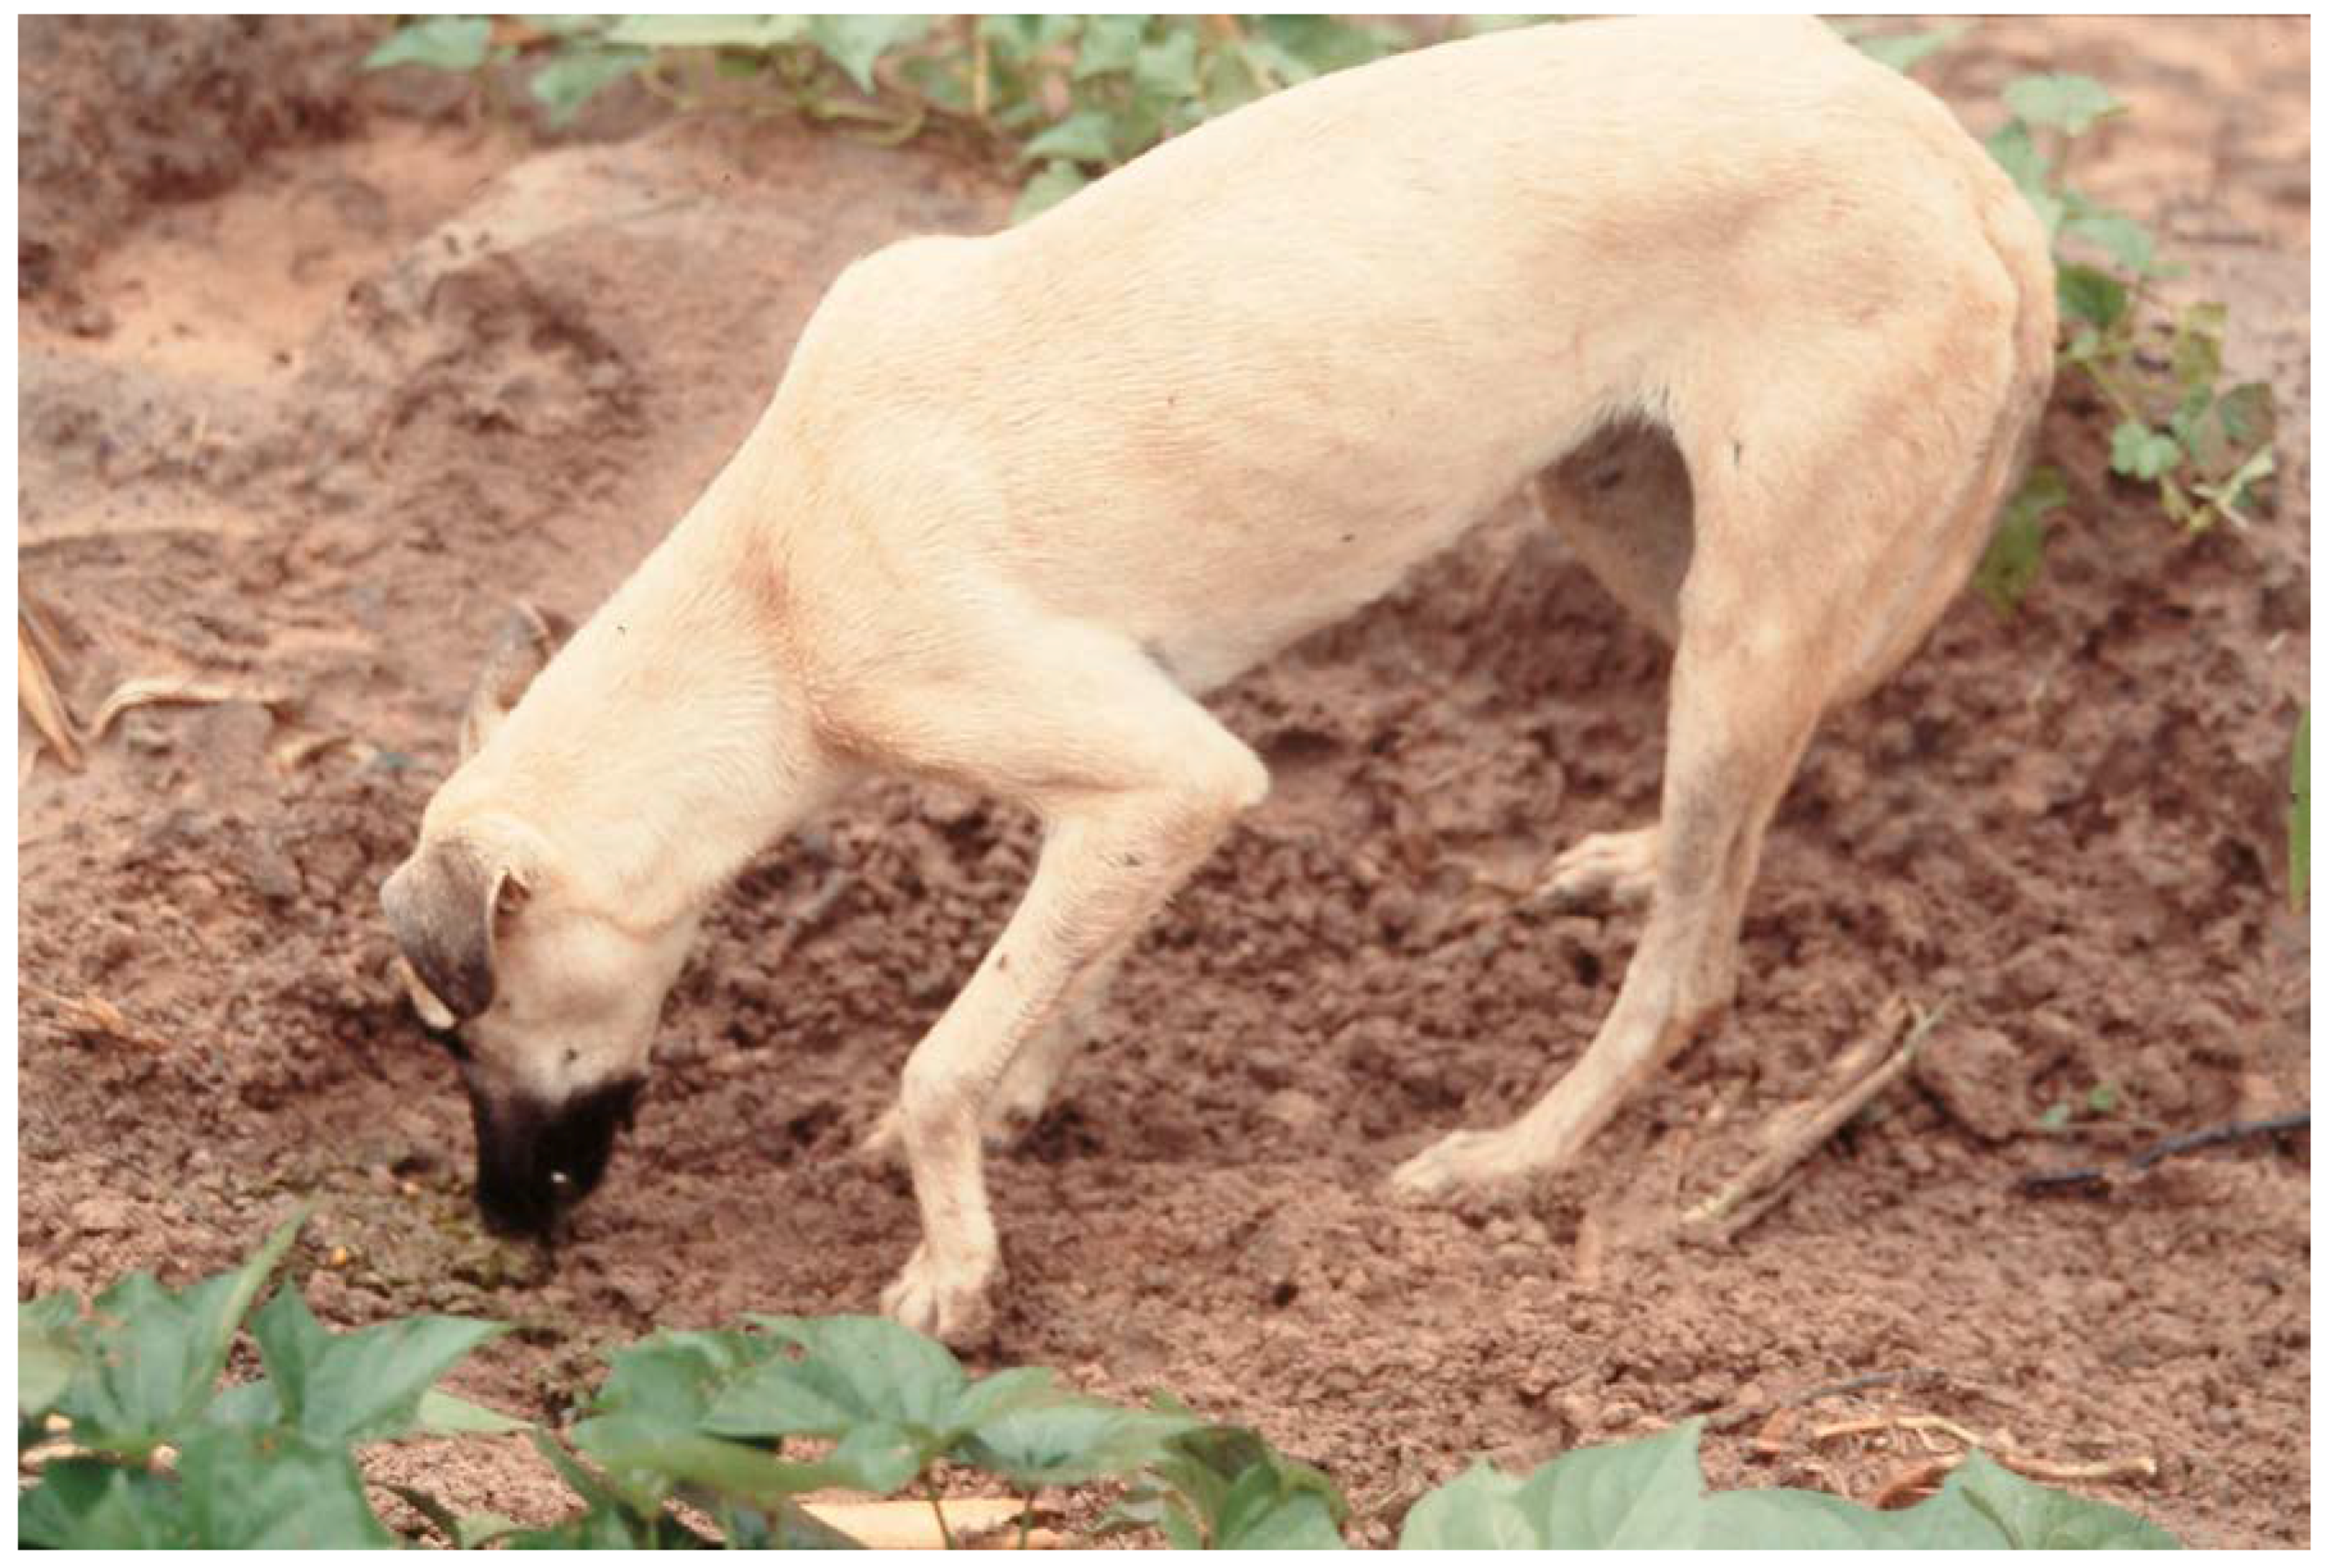 Animals | Free Full-Text | Anthropogenic Food Subsidy to a Commensal  Carnivore: The Value and Supply of Human Faeces in the Diet of Free-Ranging  Dogs